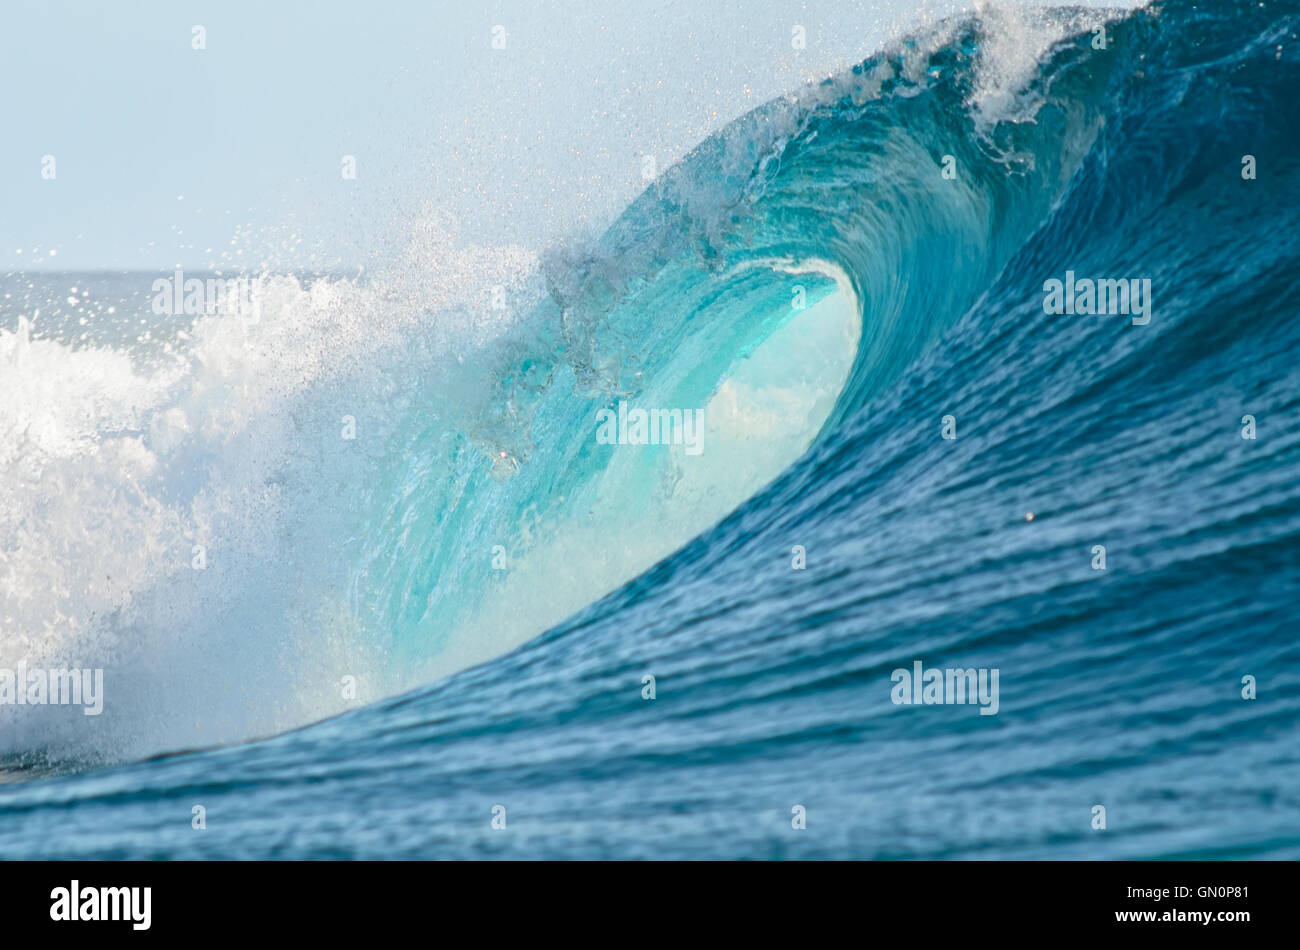 A big barrel wave break in the Pacific Ocean, perfect for surfing. Stock Photo